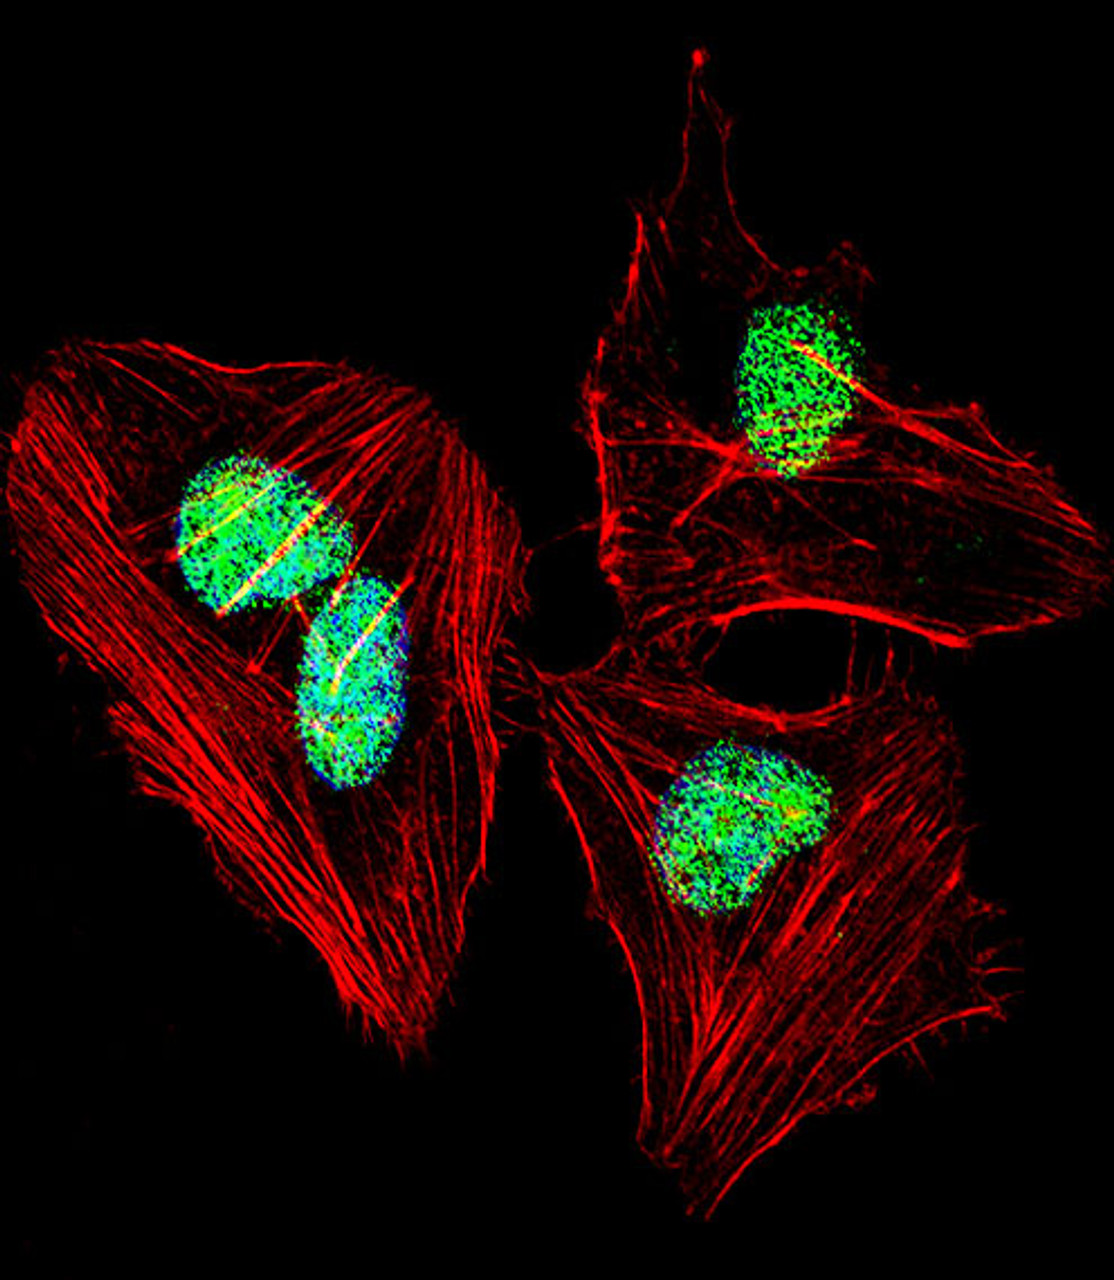 Fluorescent confocal image of Hela cell stained with NFIA Antibody .Hela cells were fixed with 4% PFA (20 min) , permeabilized with Triton X-100 (0.1%, 10 min) , then incubated with NFIA primary antibody (1:25) . For secondary antibody, Alexa Fluor 488 conjugated donkey anti-rabbit antibody (green) was used (1:400) .Cytoplasmic actin was counterstained with Alexa Fluor 555 (red) conjugated Phalloidin (7units/ml) . Nuclei were counterstained with DAPI (blue) (10 ug/ml, 10 min) . NFIA immunoreactivity is localized to Nucleus significantly.